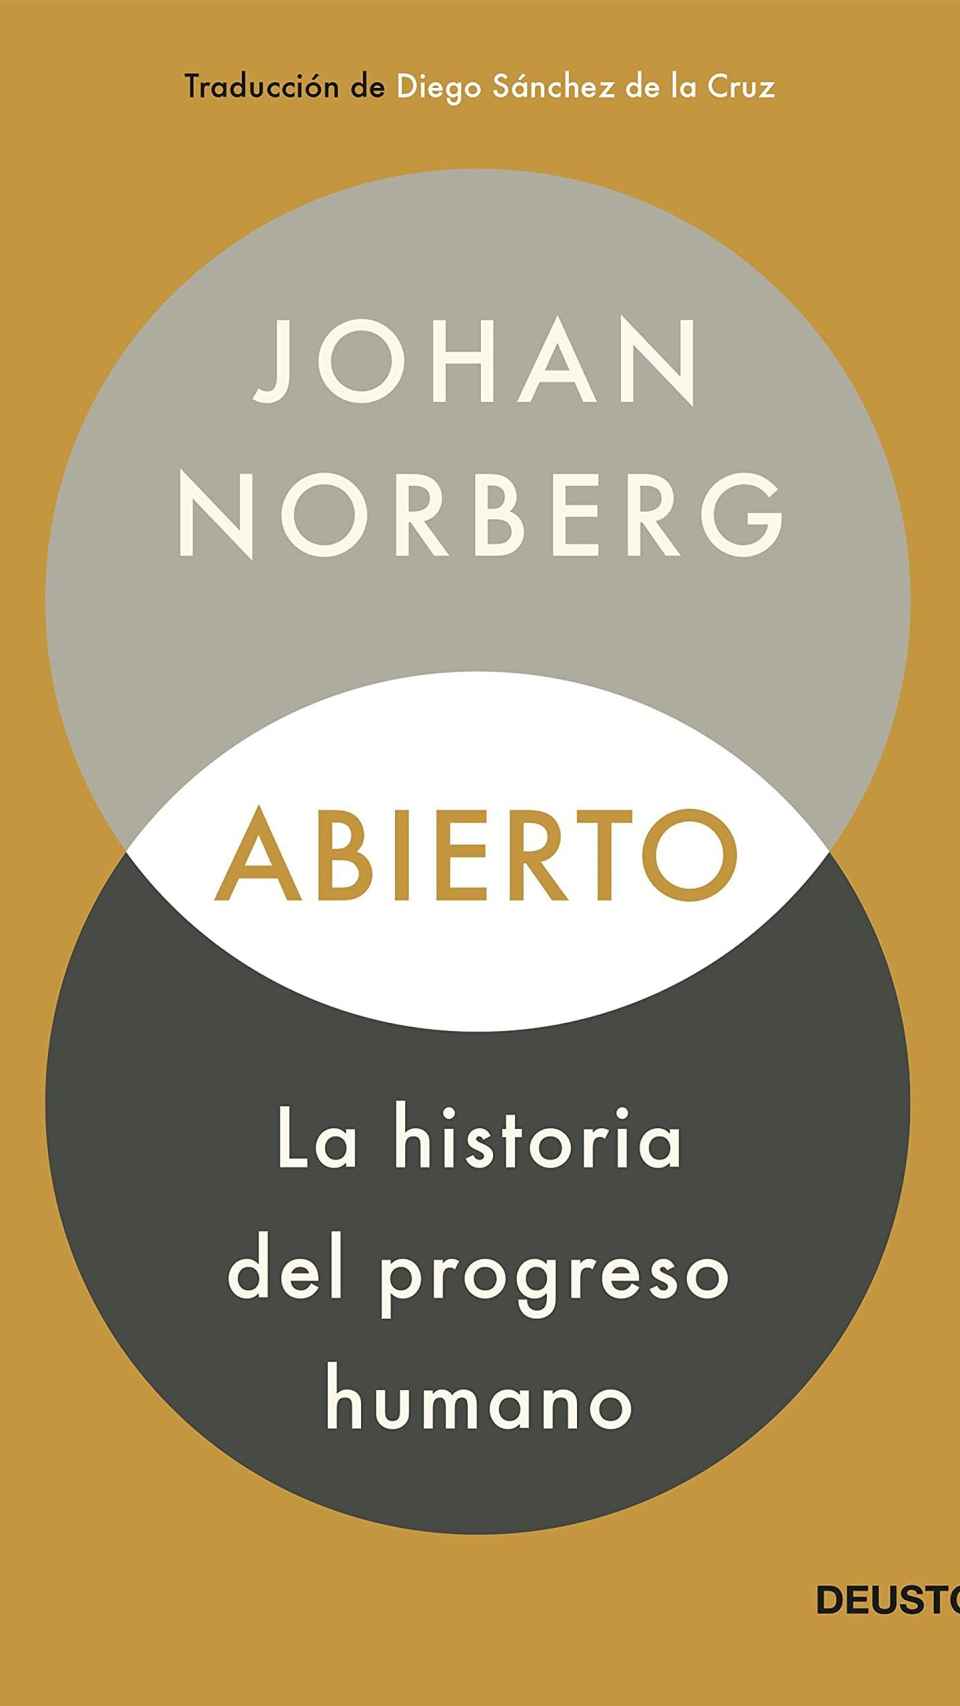 Open: The Story of Human Progress, by Johan Norberg.